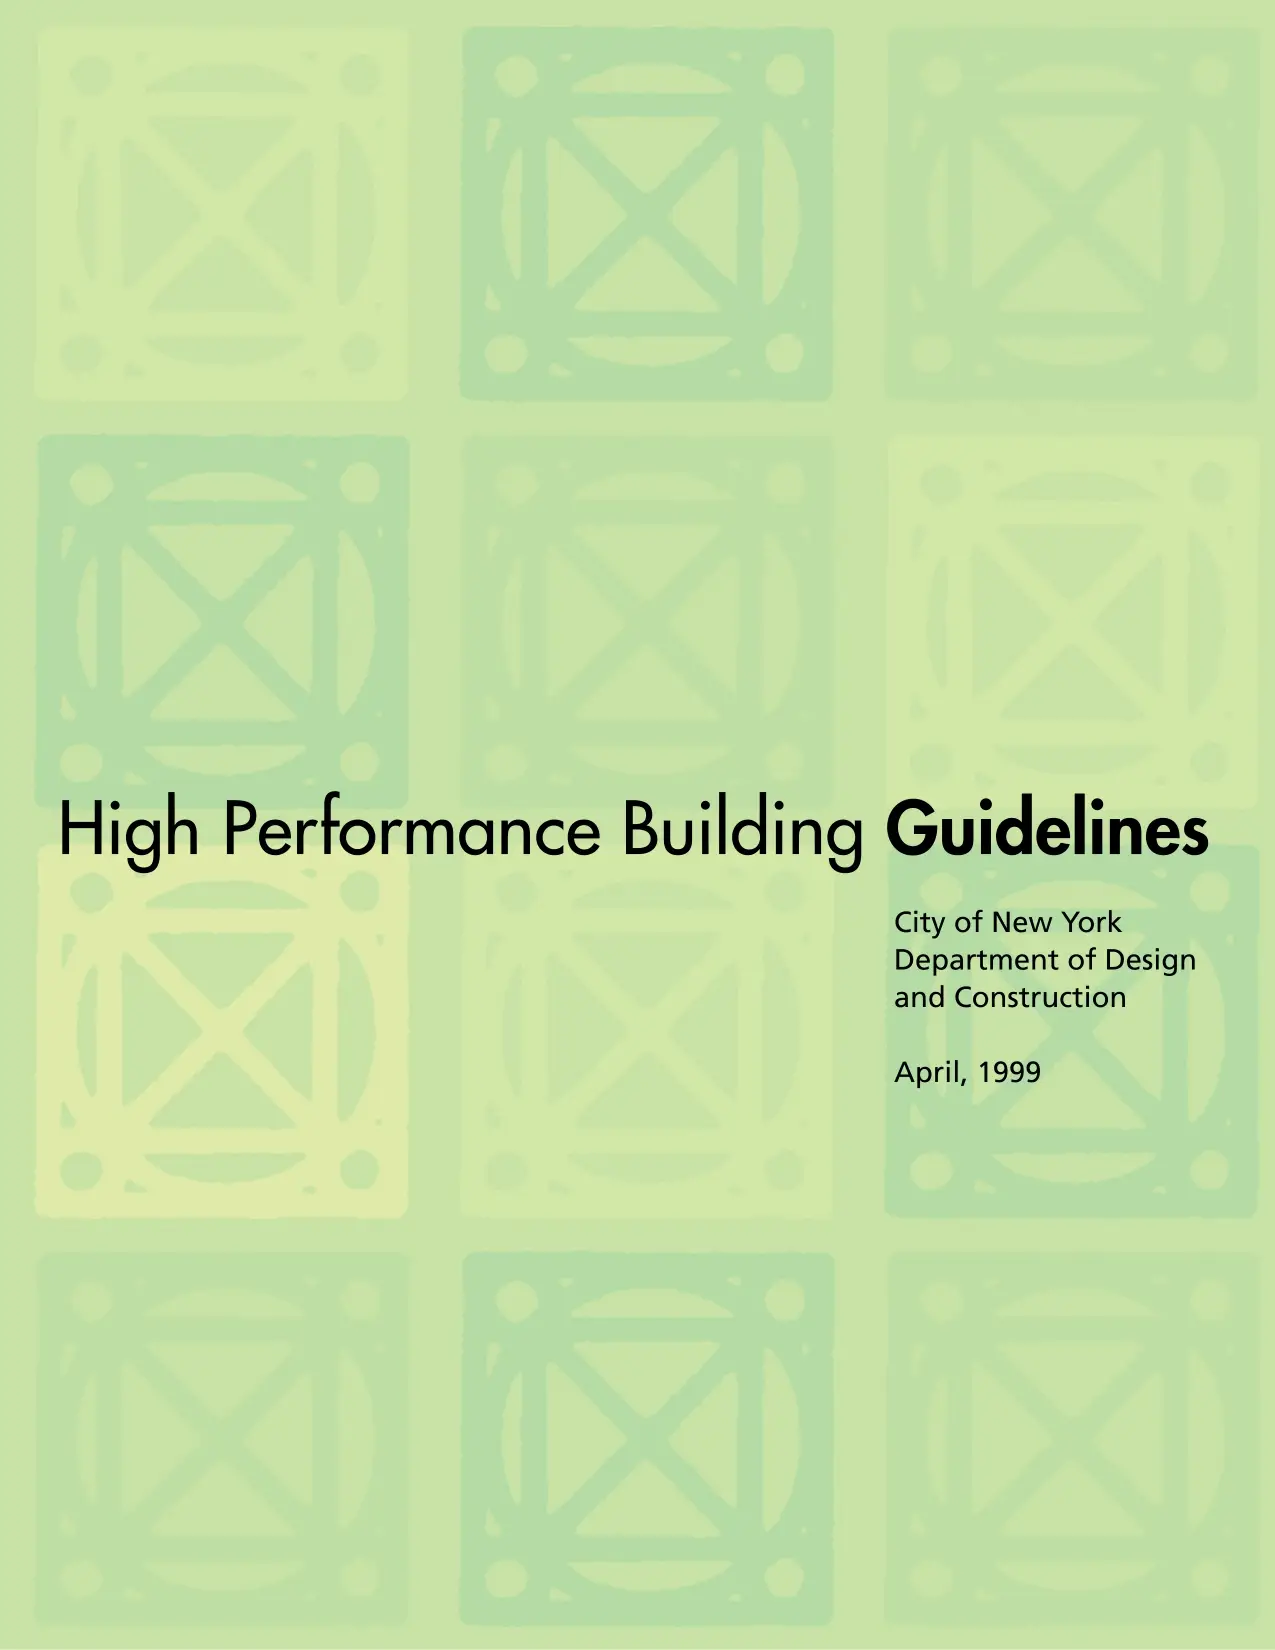 High Performance Building Guidelines